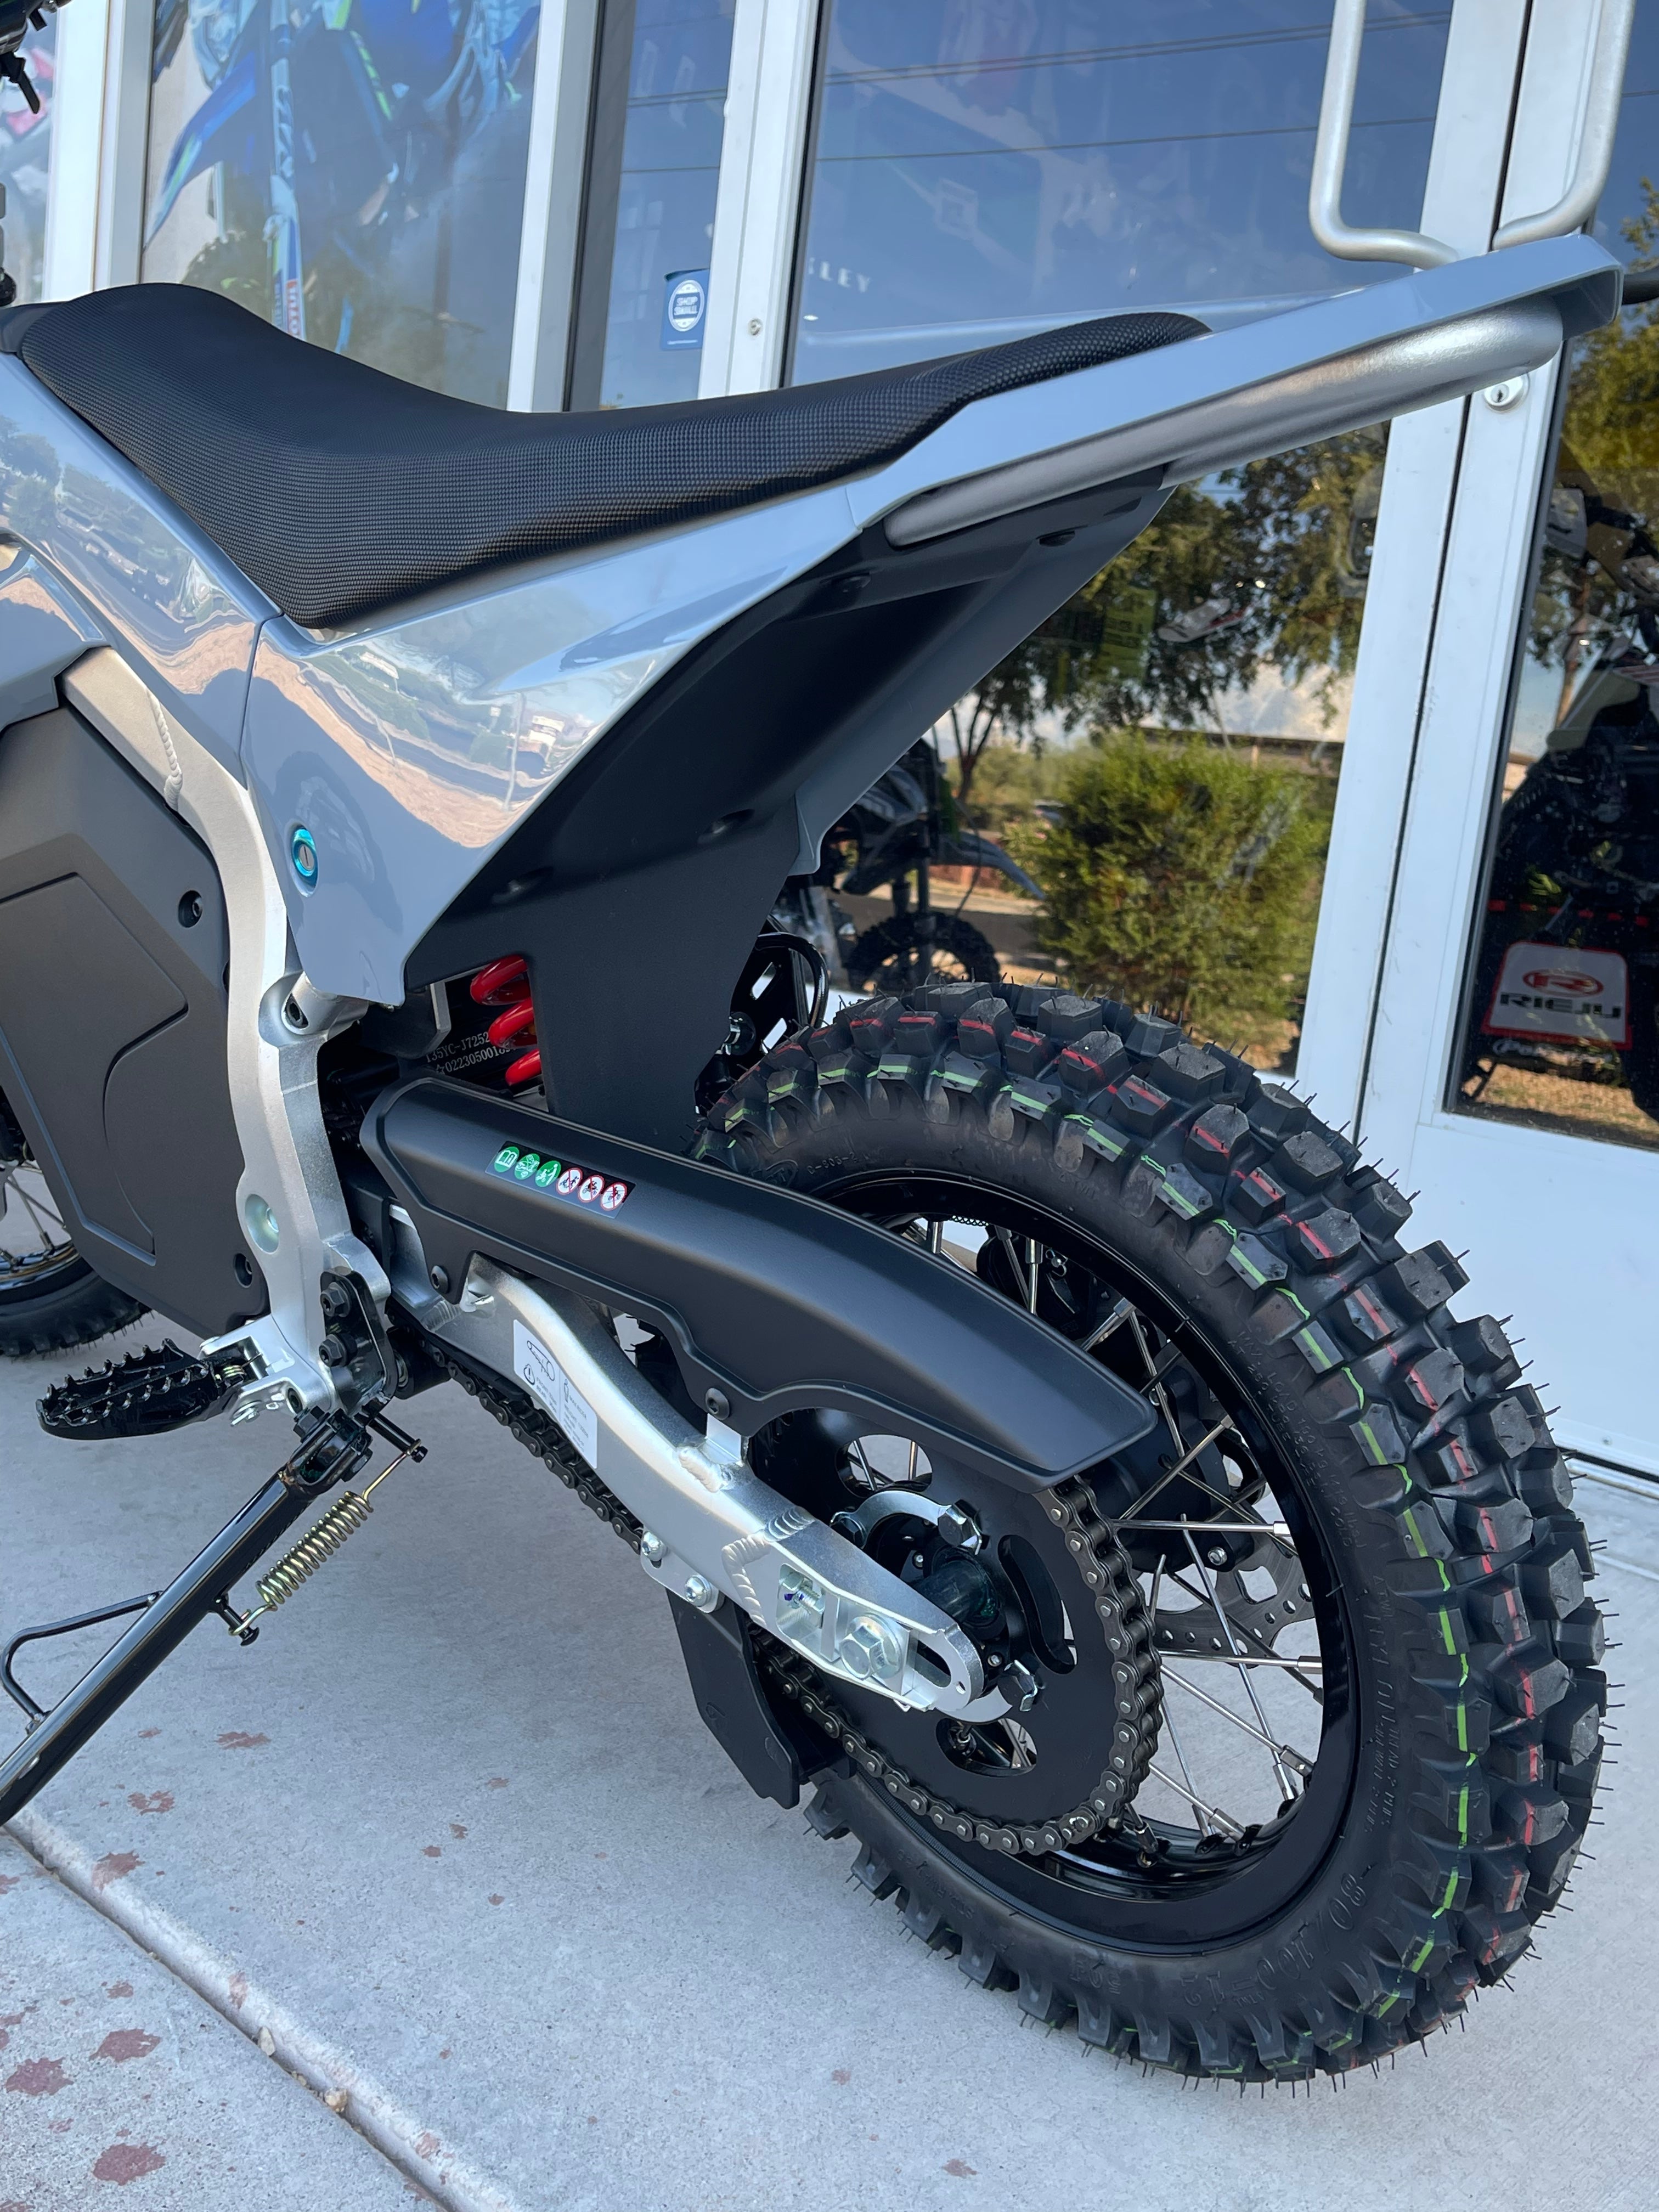 G3 Electric Pitbike